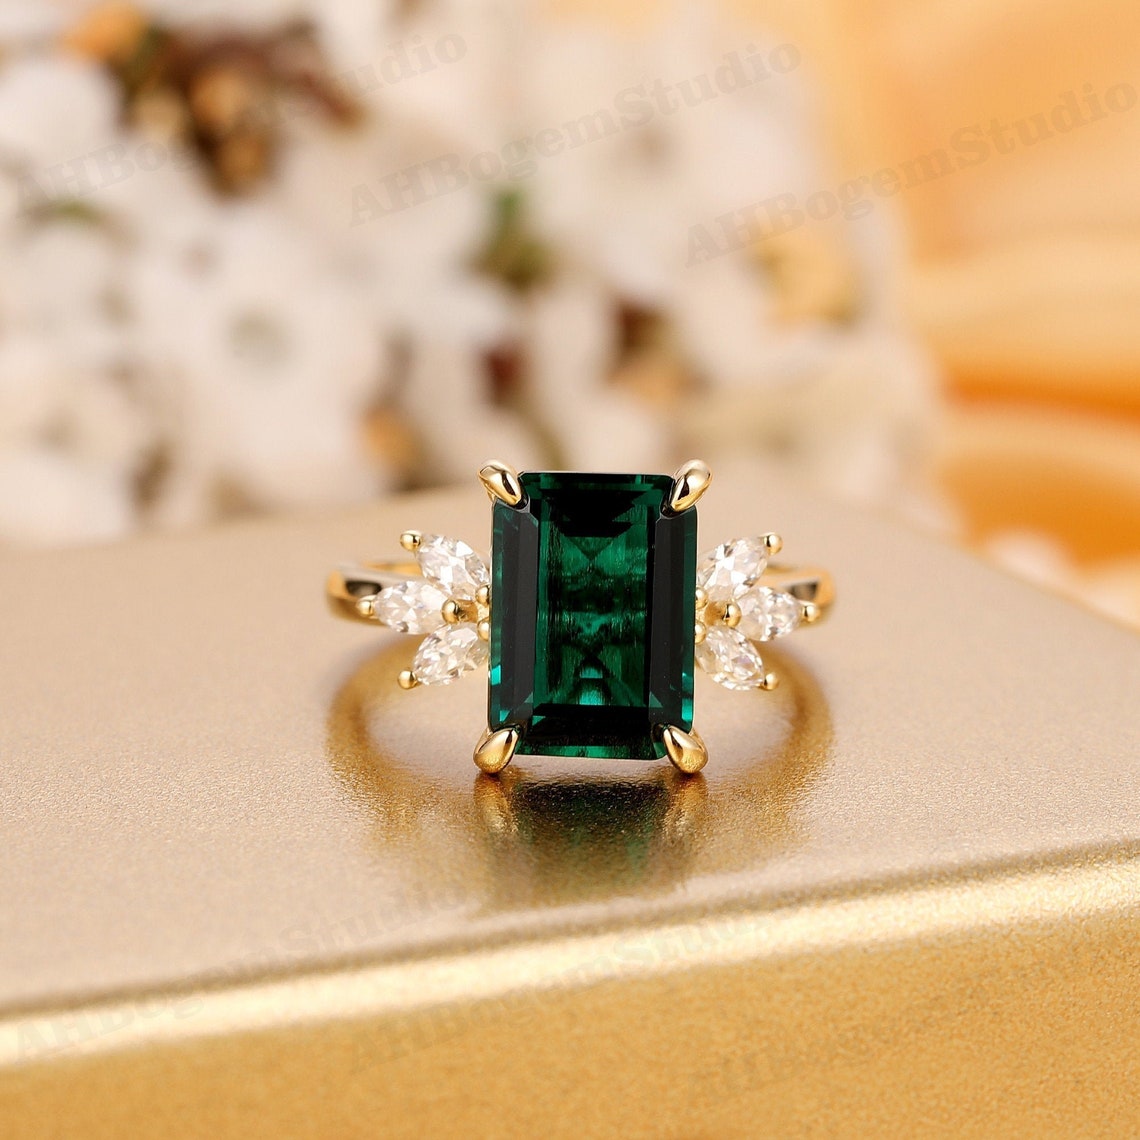 4ct Emerald Engagement Ring Emerald Cut Solid 14K Gold image 1